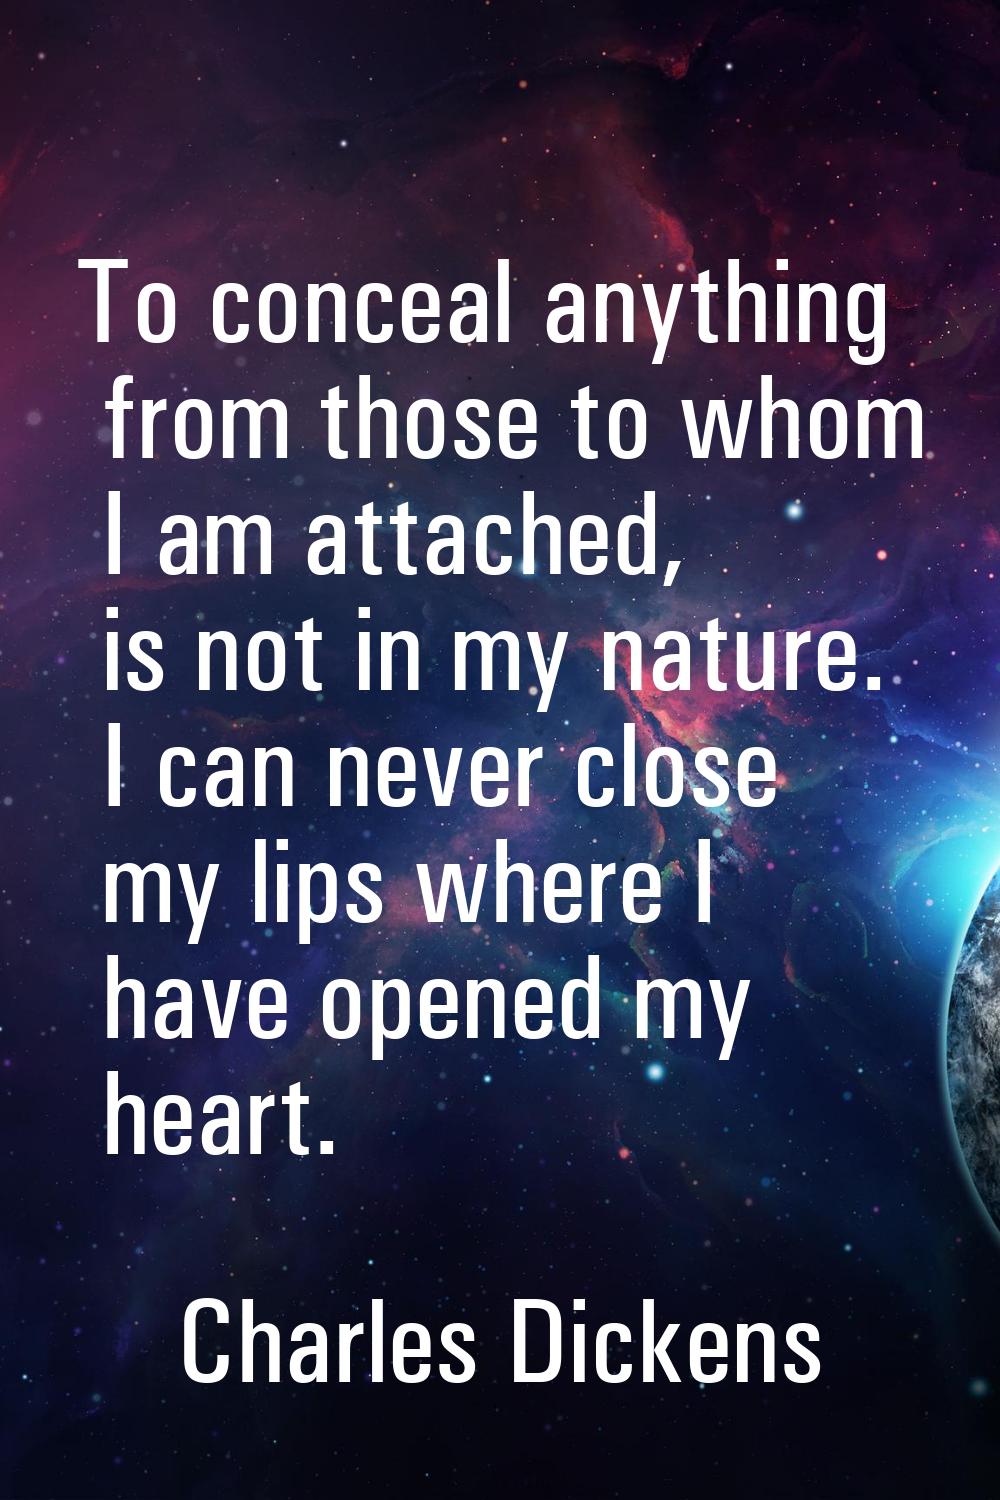 To conceal anything from those to whom I am attached, is not in my nature. I can never close my lip